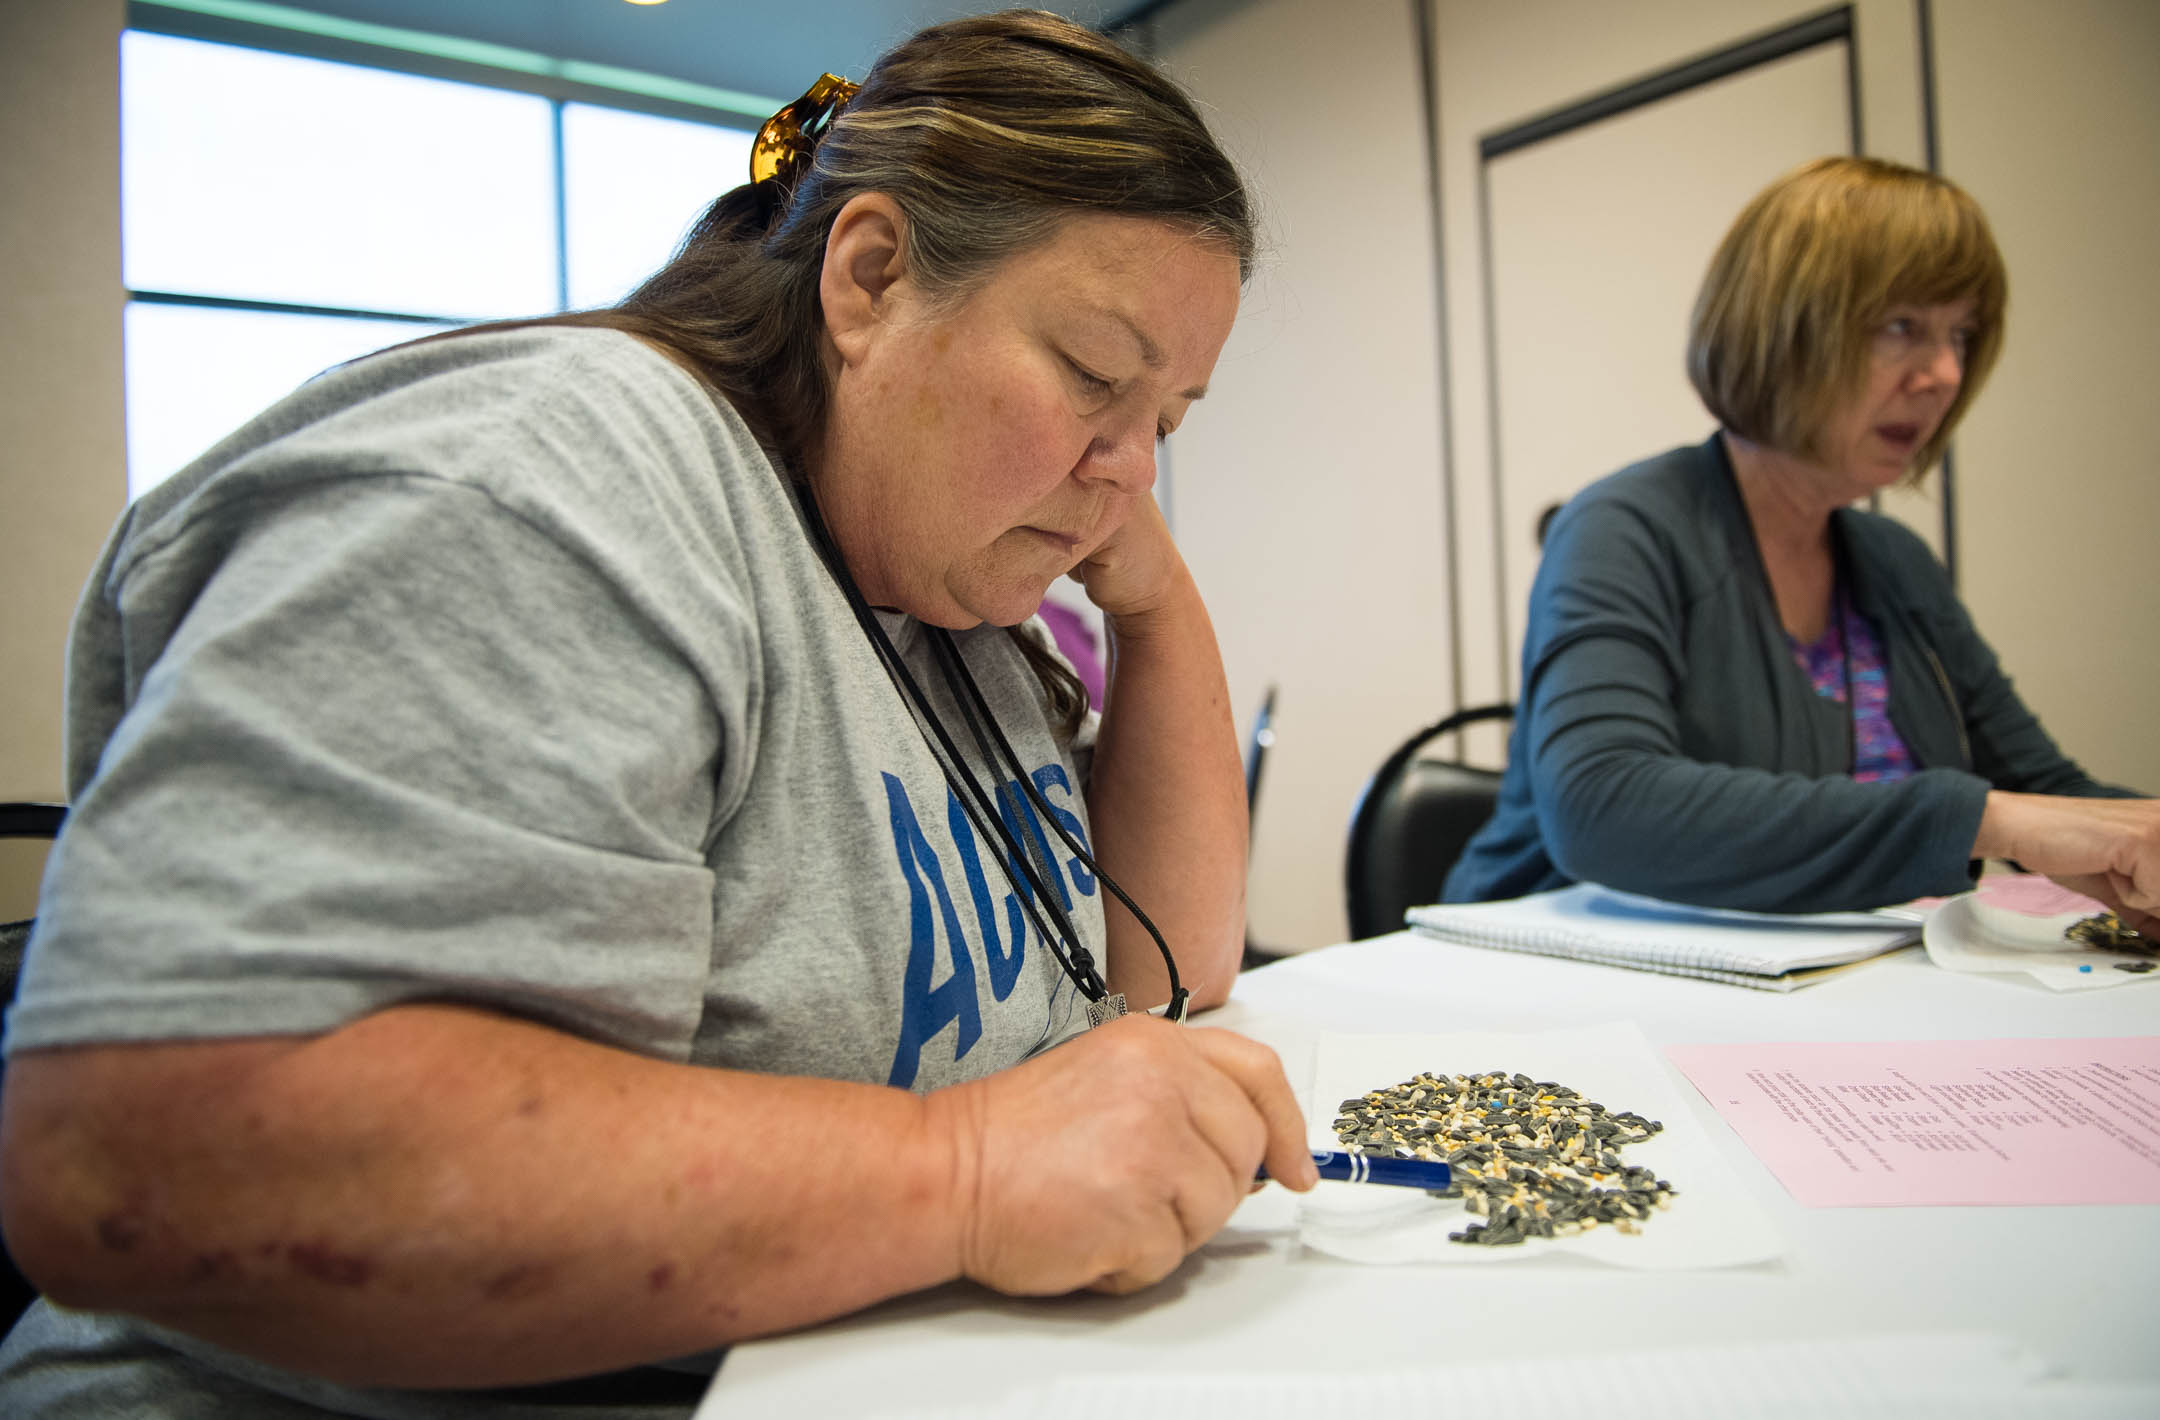 Deborah Hensley, an 8th-grade science teacher at Adair Couty Middle School, sorts through birdseed to find beads as part of a lesson used to demonstrate more sustainable mining techniques during the Kentucky Crushed Stone Association teachers' workshop. The workshop was revived after a one-year absence, with an emphasis on providing lessons aligned with Kentucky standards. Photo by Bobby Ellis, June 21, 2017